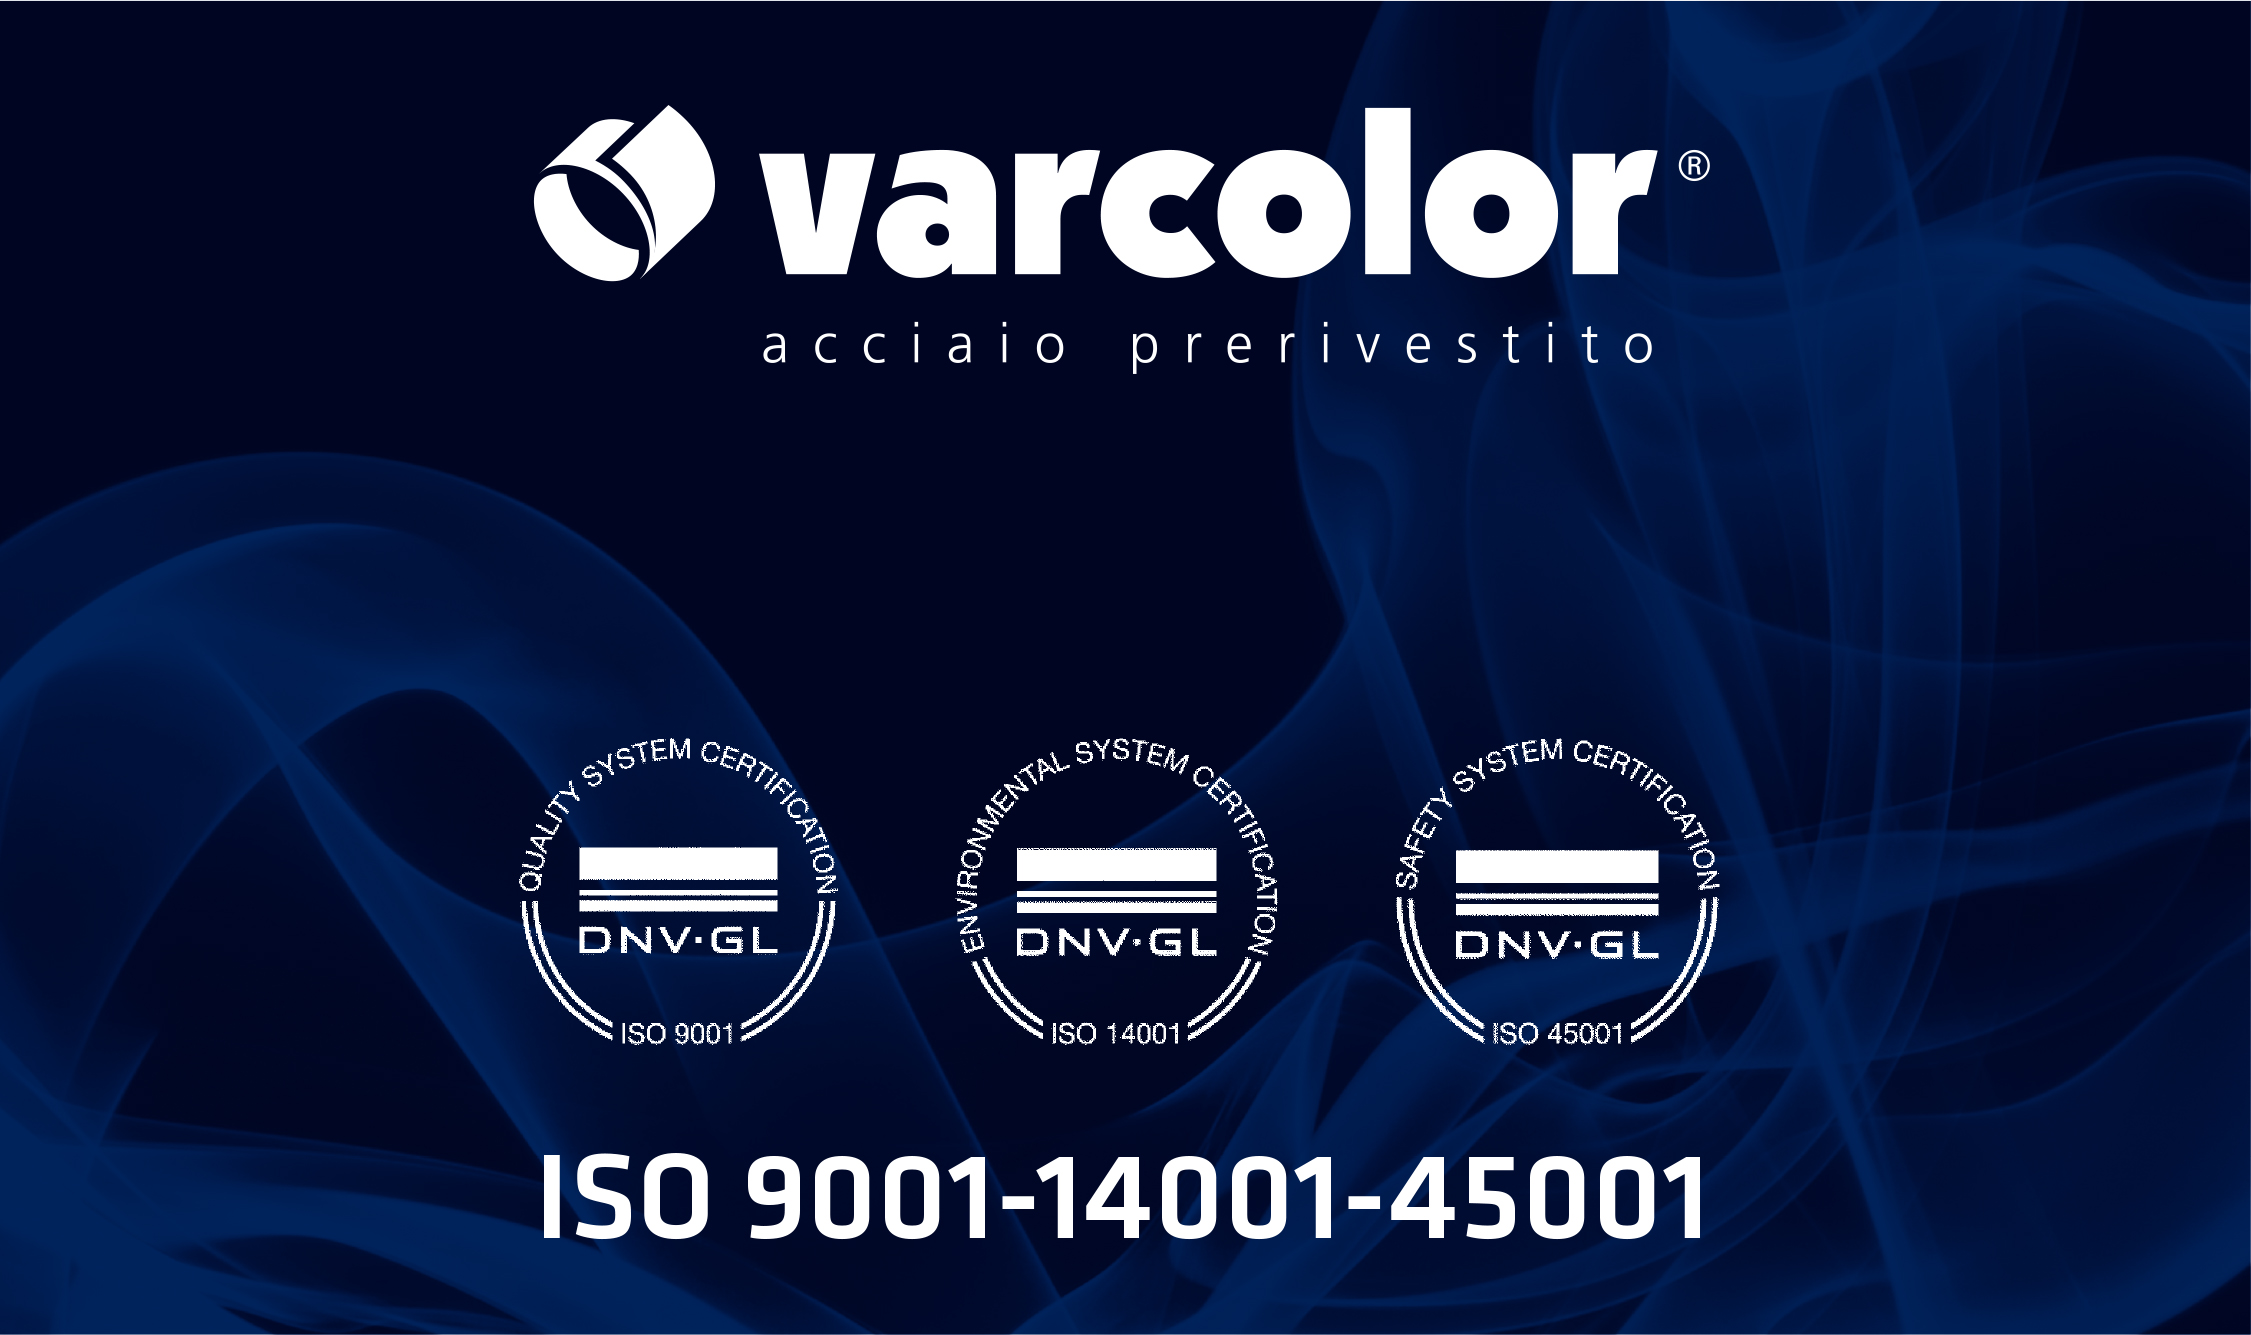 Varcolor - ISO 9001, ISO 14001, ISO 45001